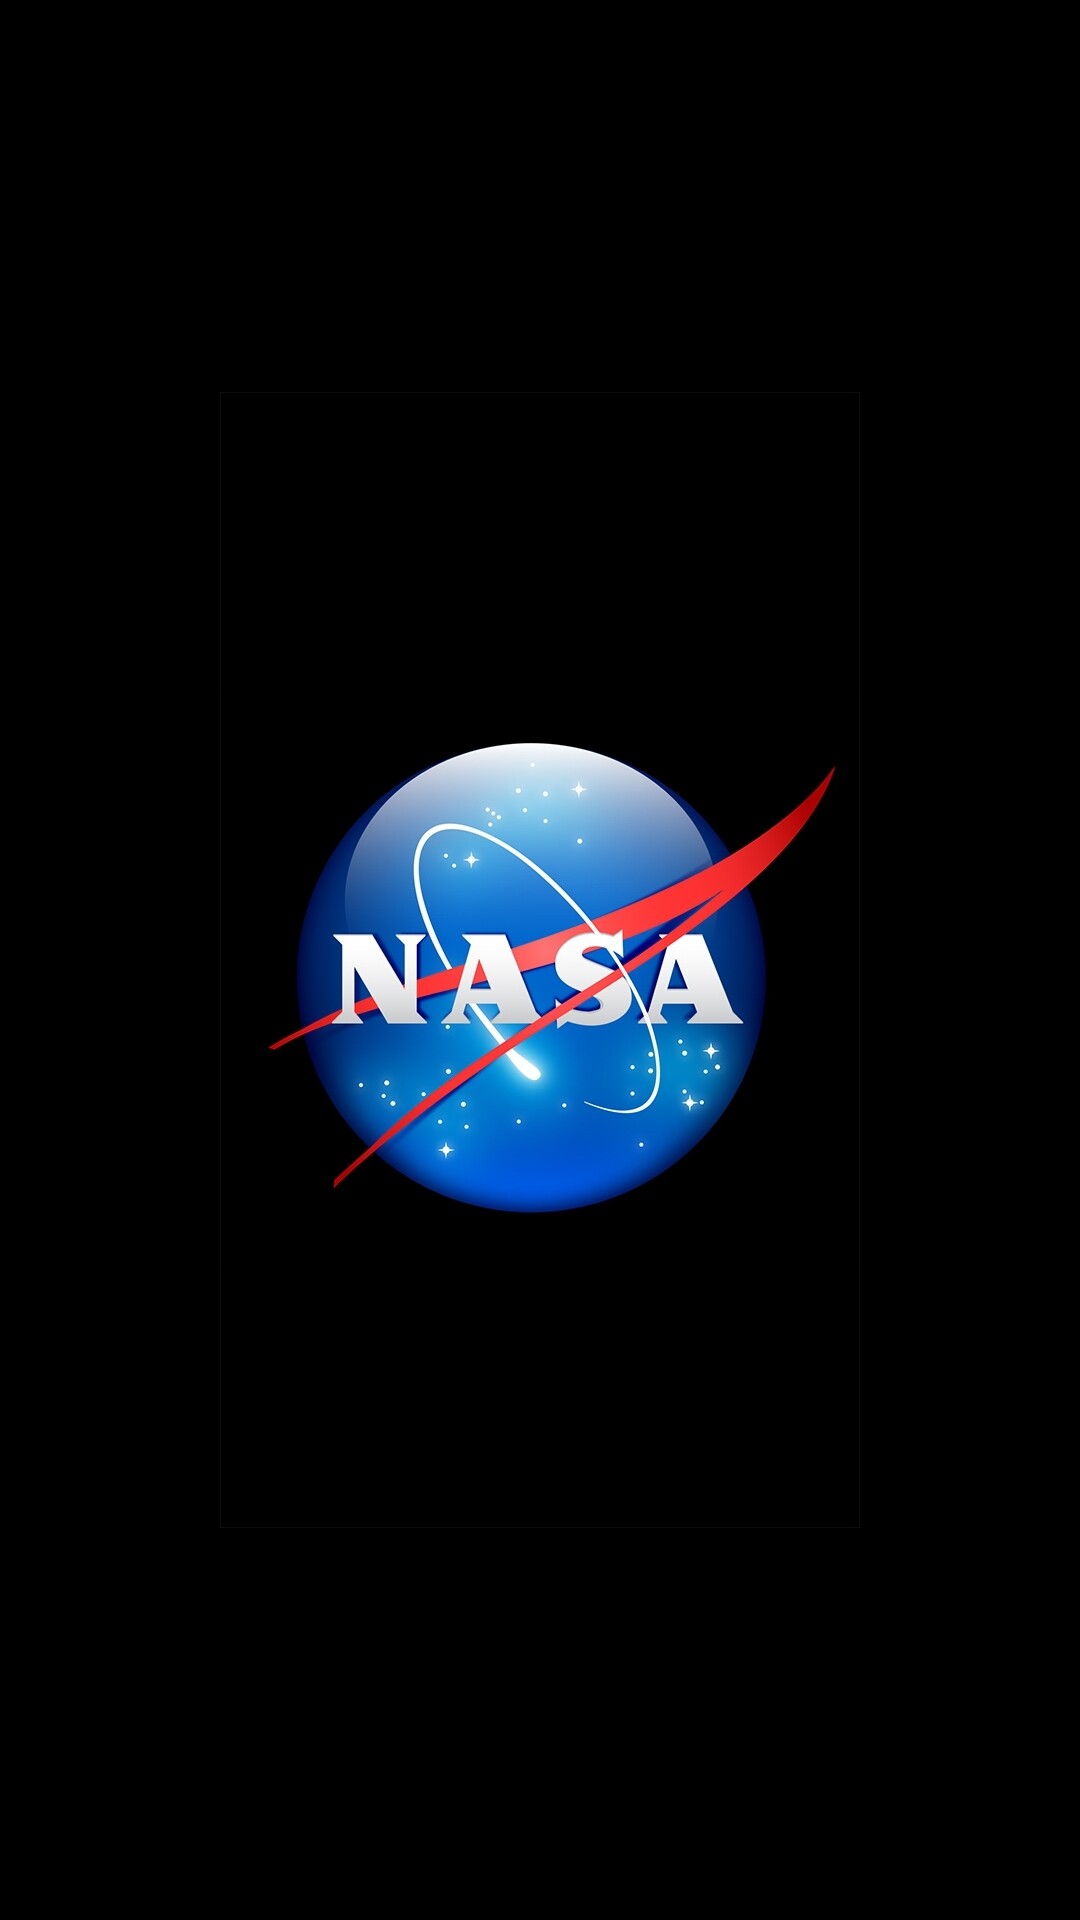 NASA: Logo, The agency established by the National Aeronautics and Space Act on July 29, 1958. 1080x1920 Full HD Background.